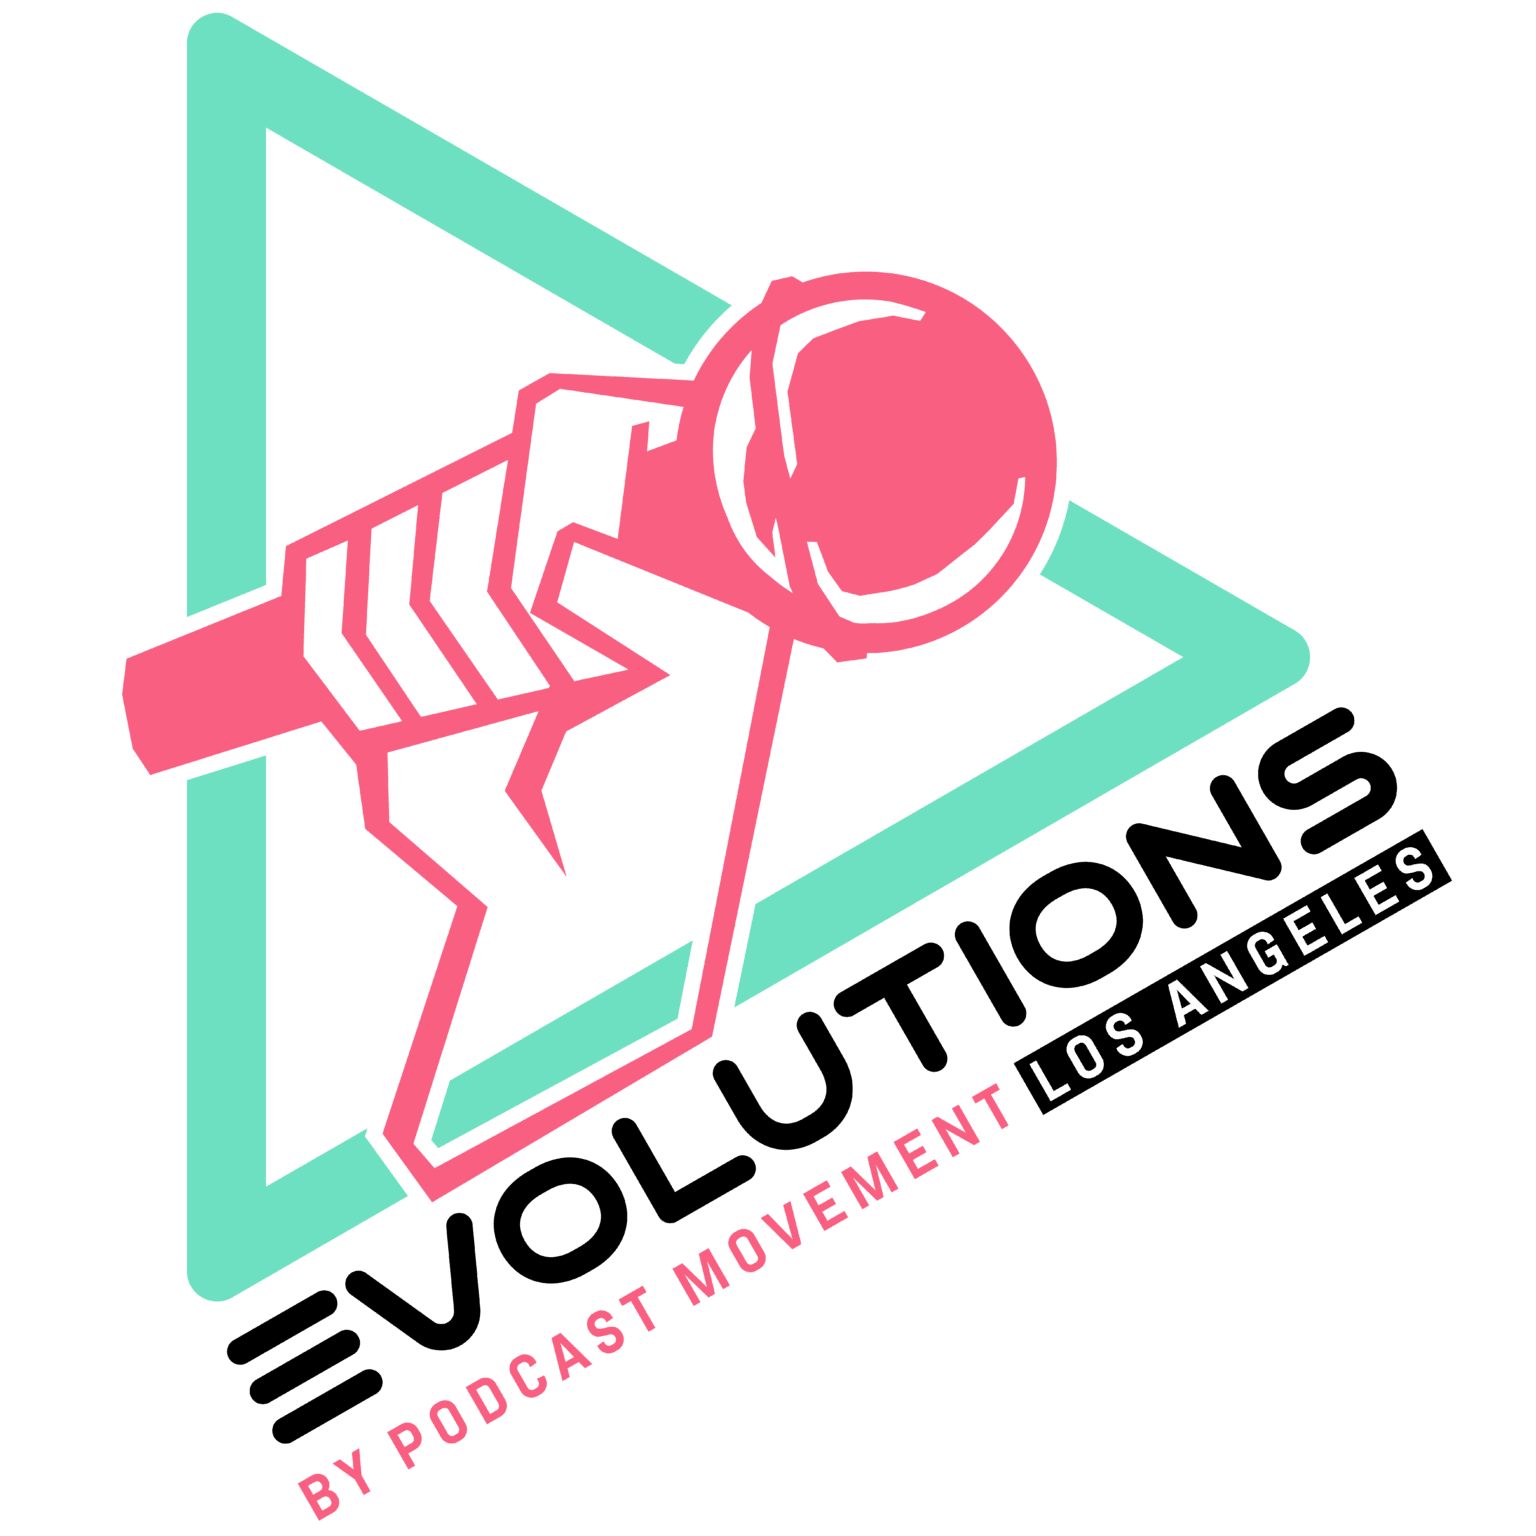 Events Podcast Movement Podcasting News, Resources, Conferences and